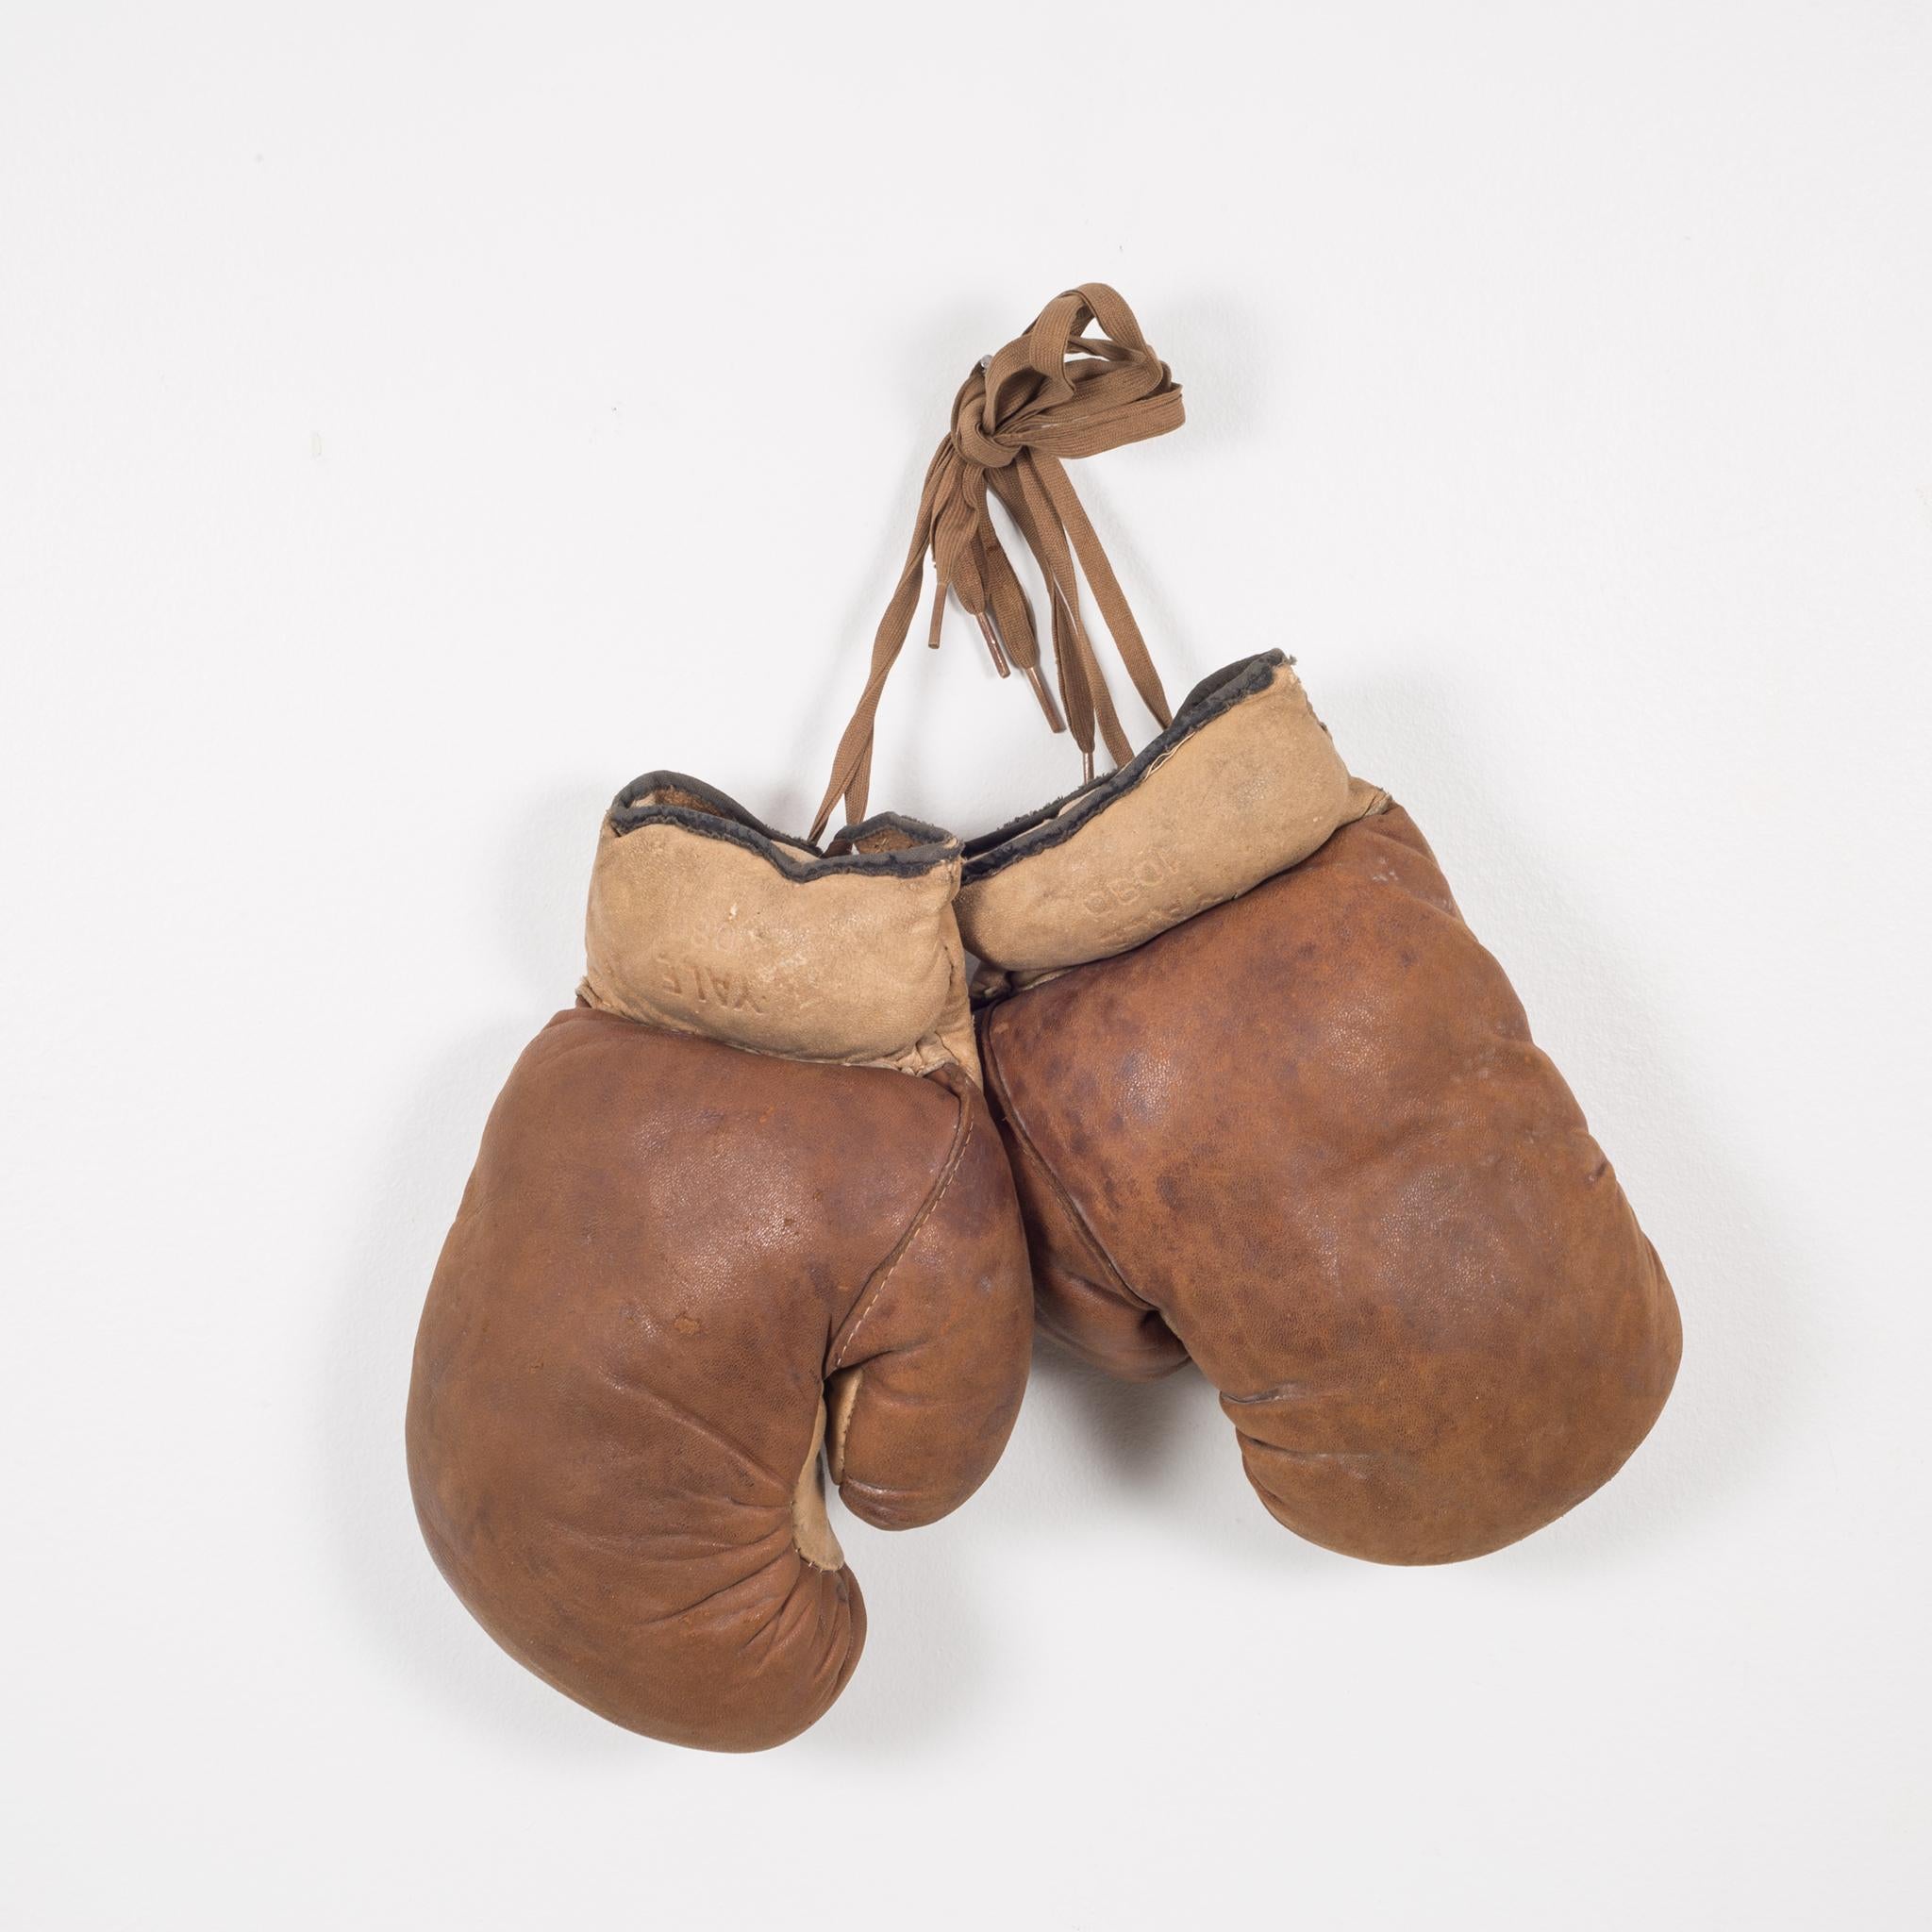 About

This is a pair of vintage junior leather boxing gloves stamped 